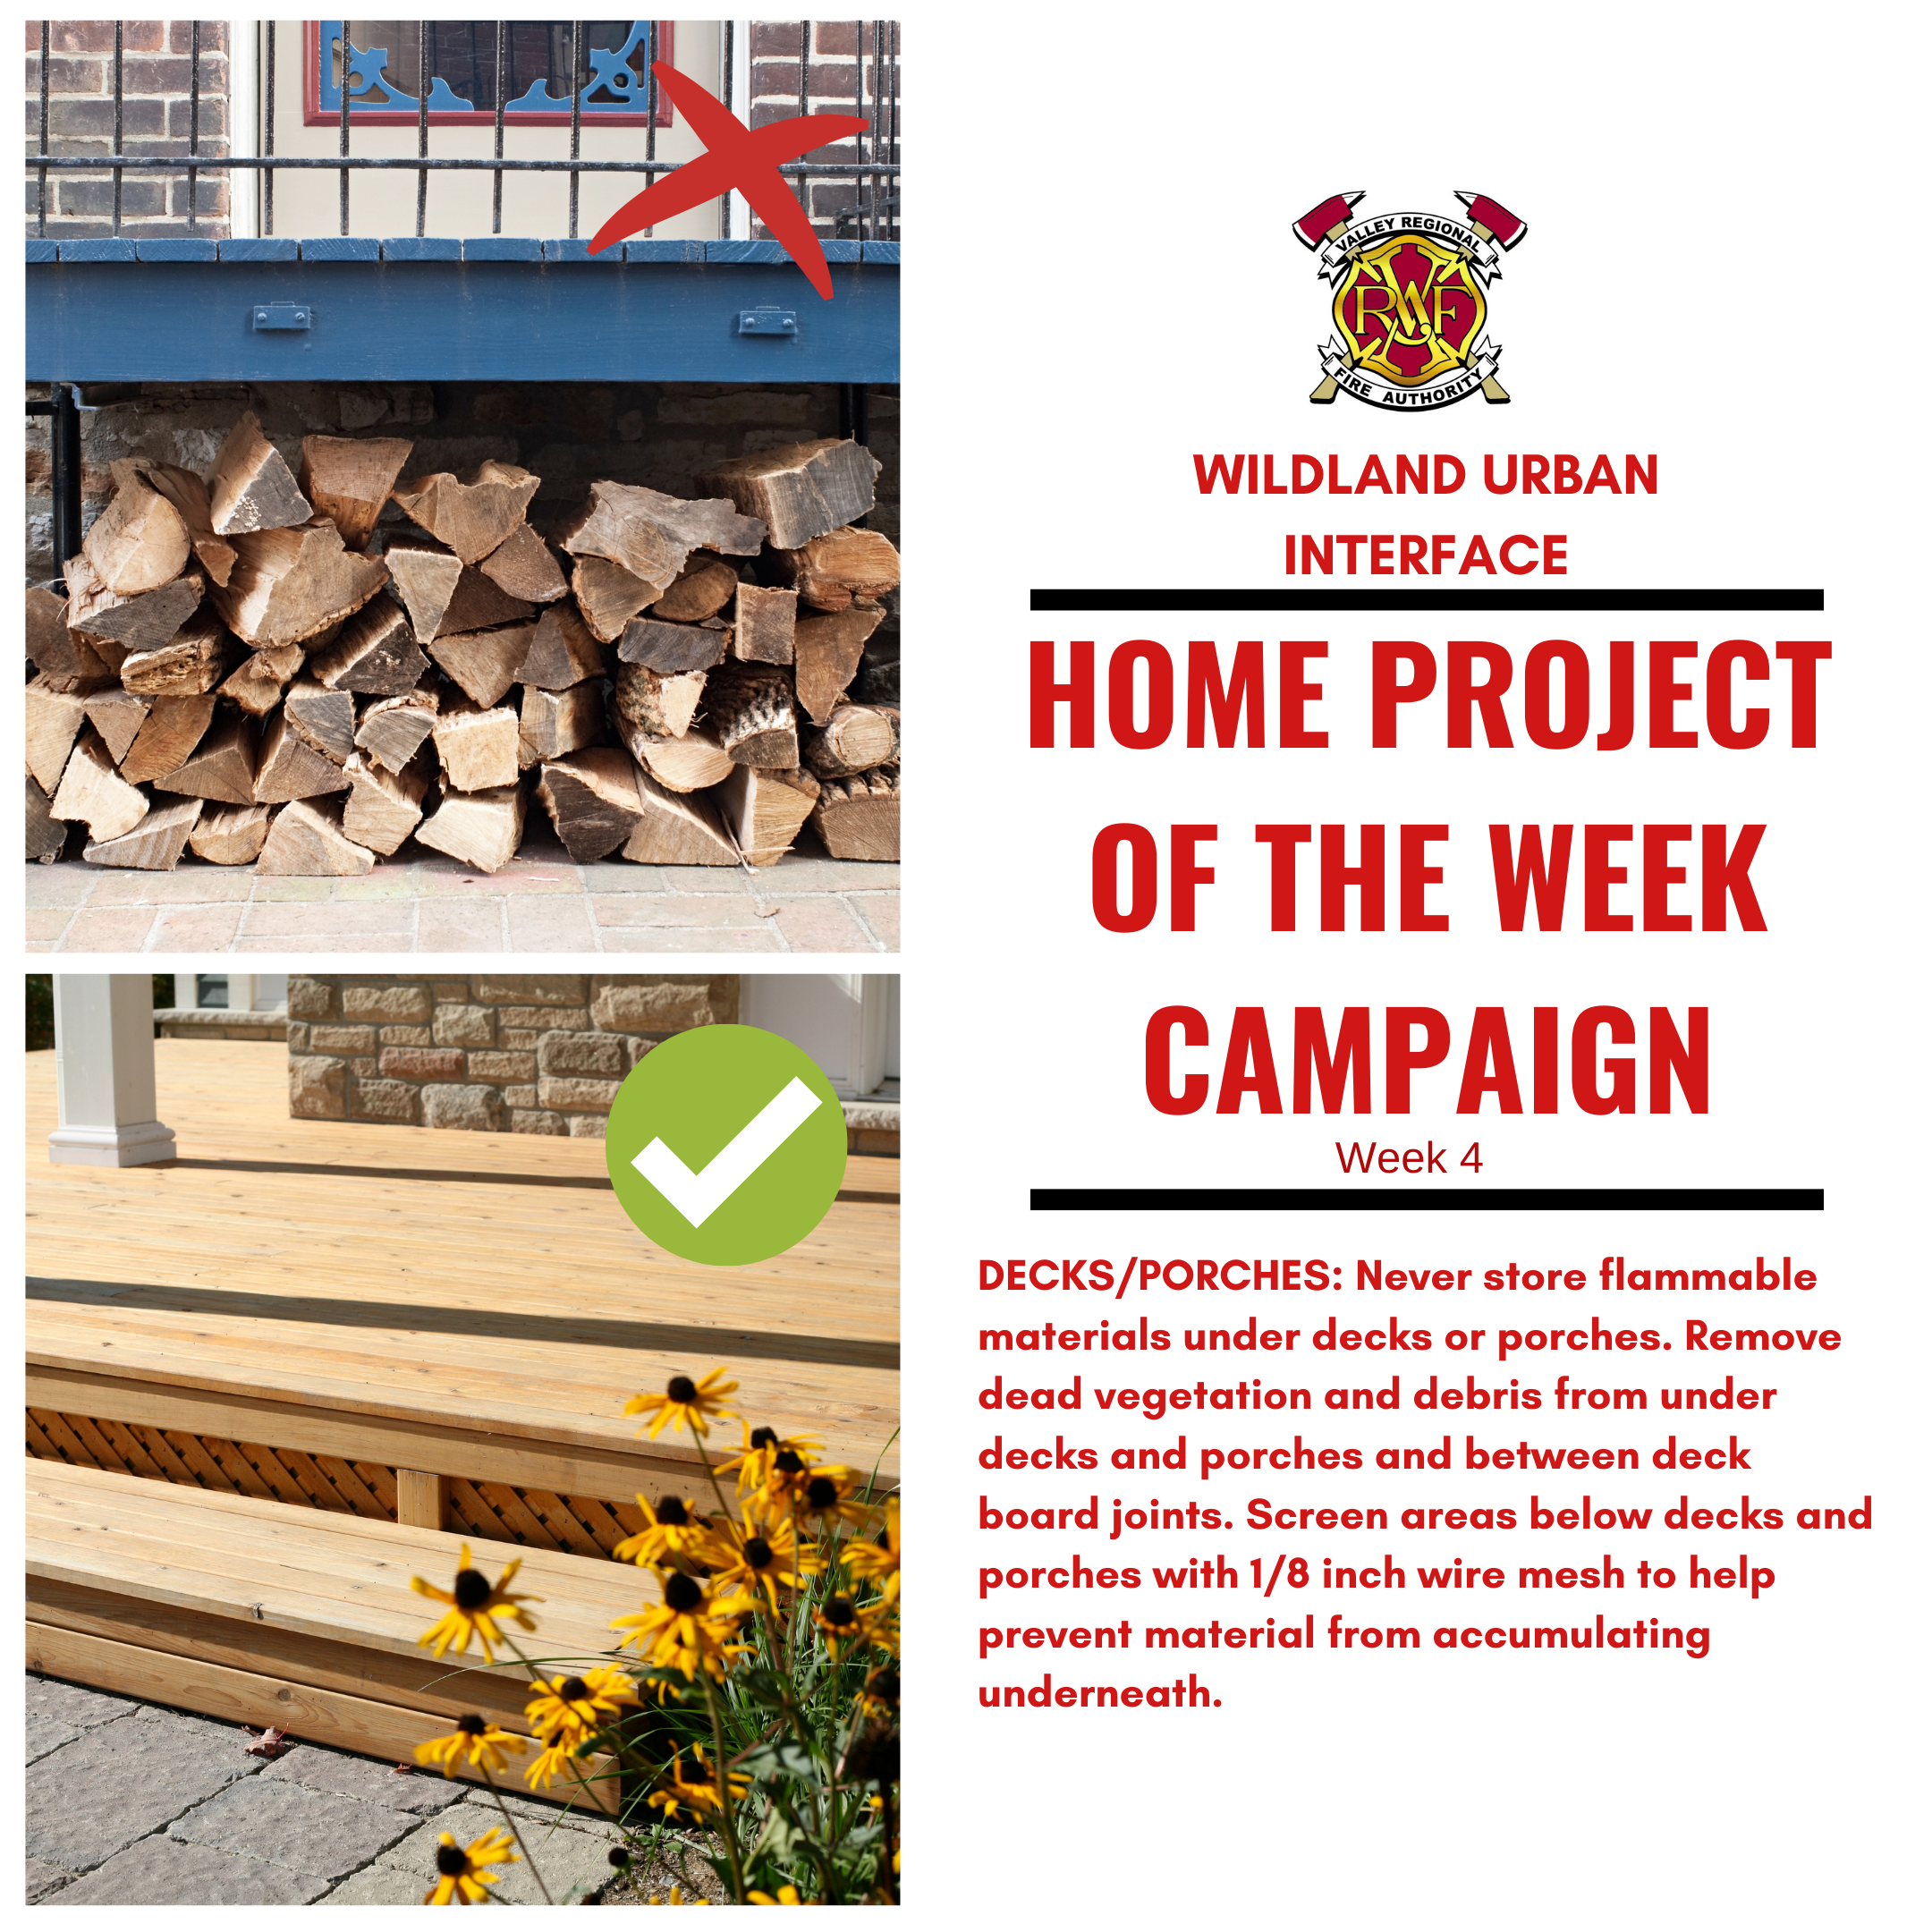 Home project of the week campaign organized by Valley Regional Fire Authority for promoting fire safety and rescue awareness.